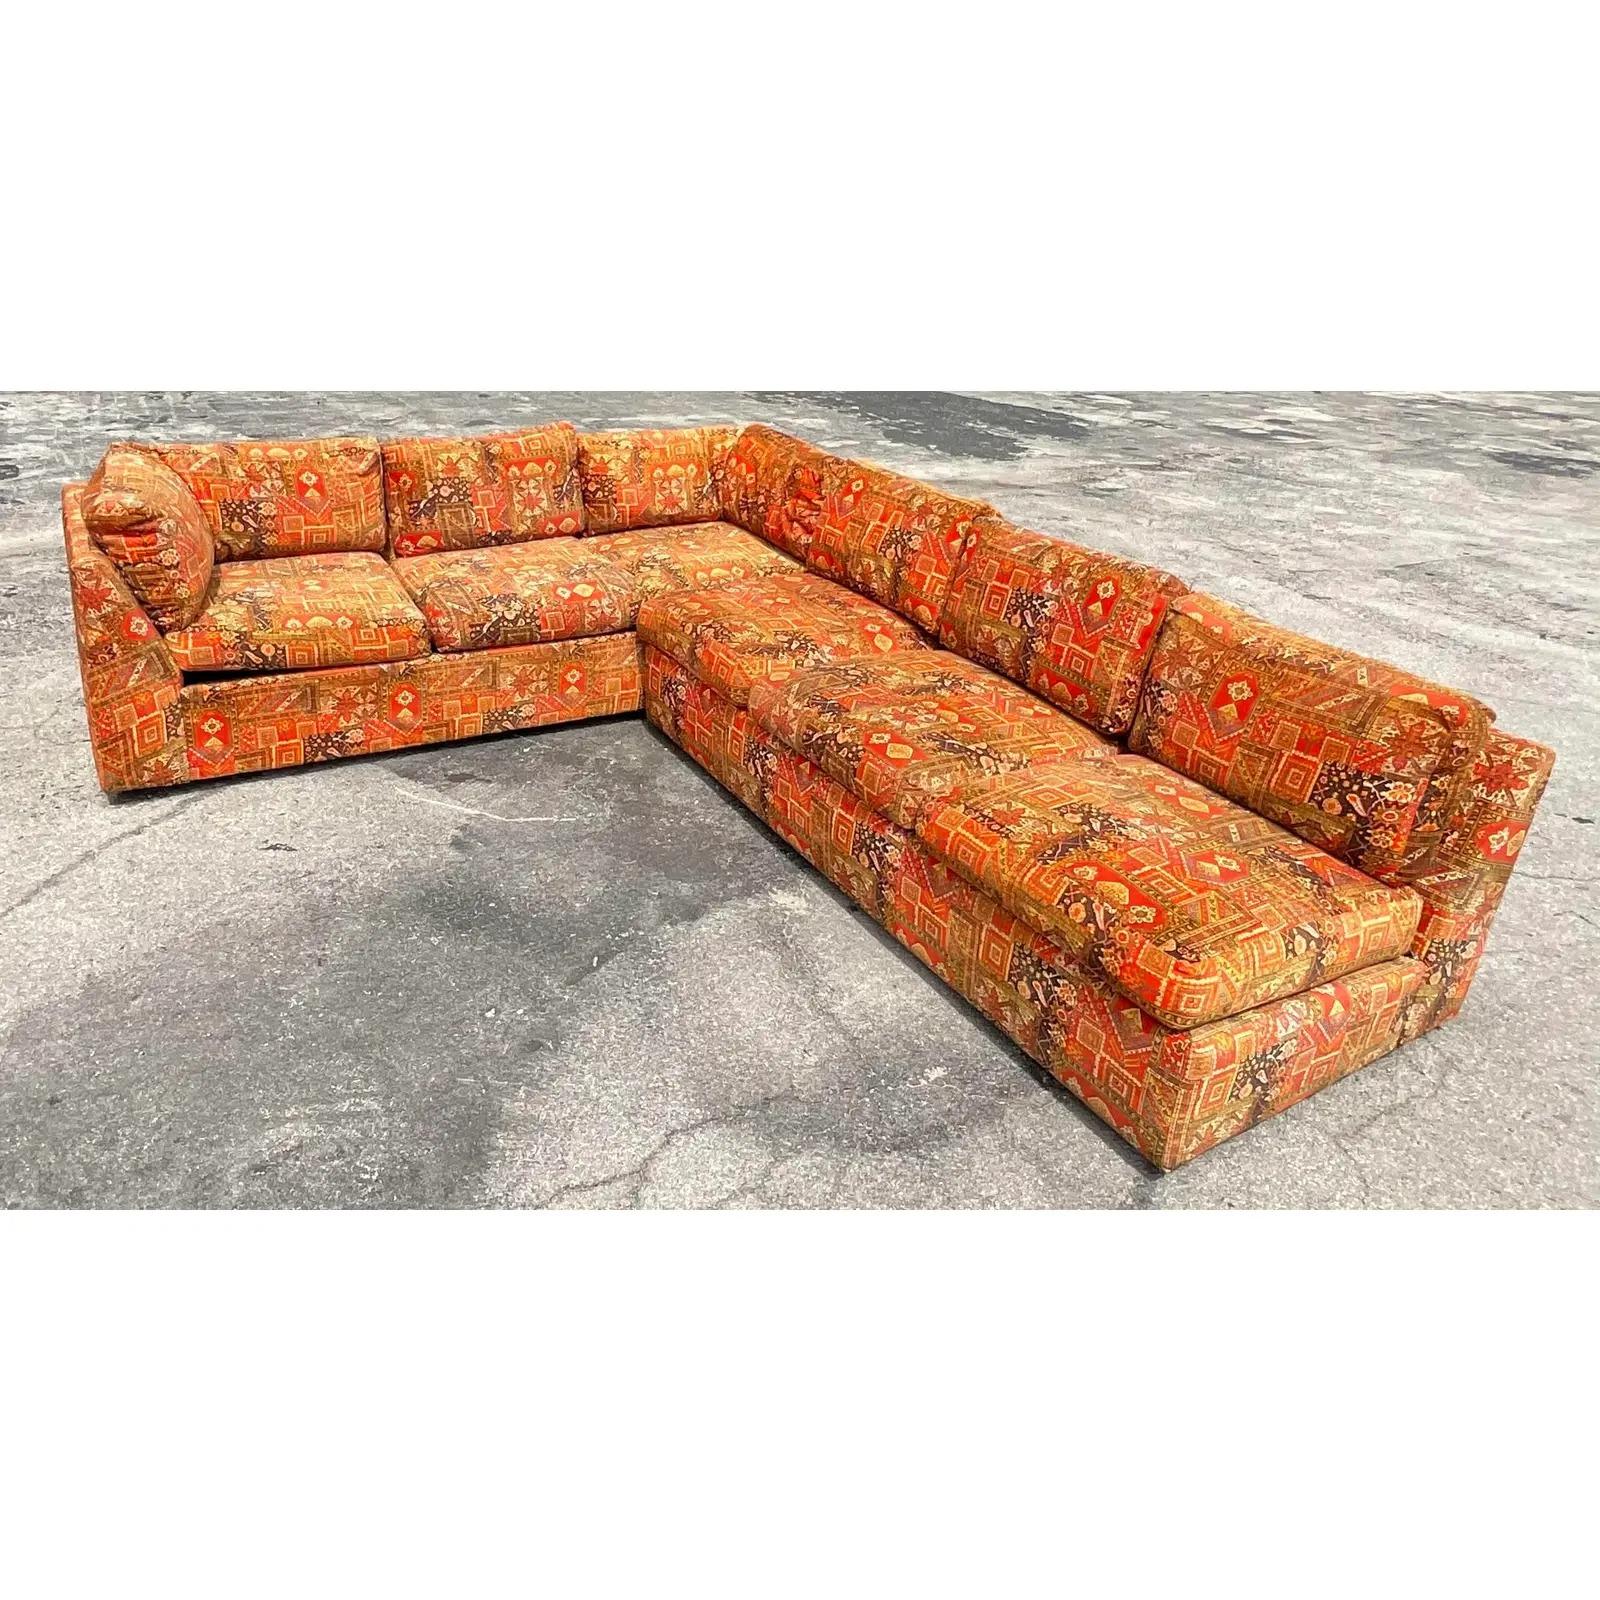 70s sectional